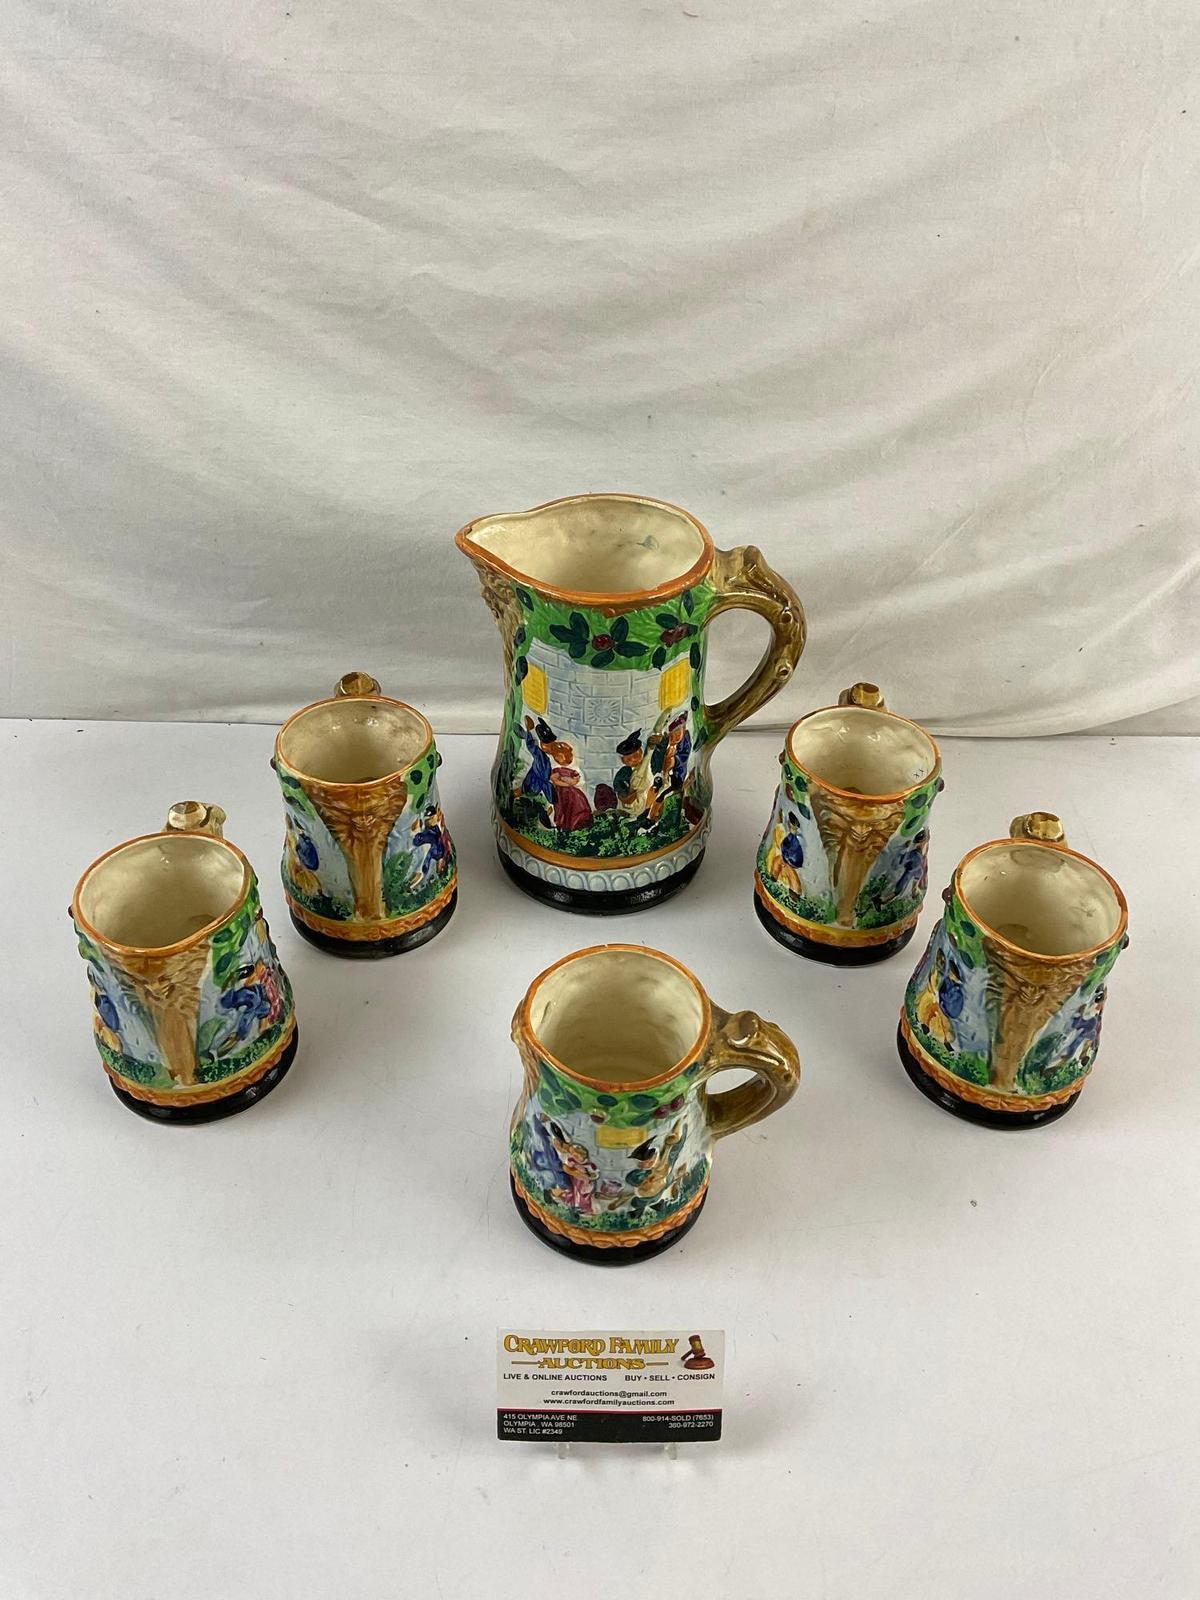 6 pcs Vintage Japanese Painted Ceramic Collectible Beer Steins w/ Dancing Scene. See pics.